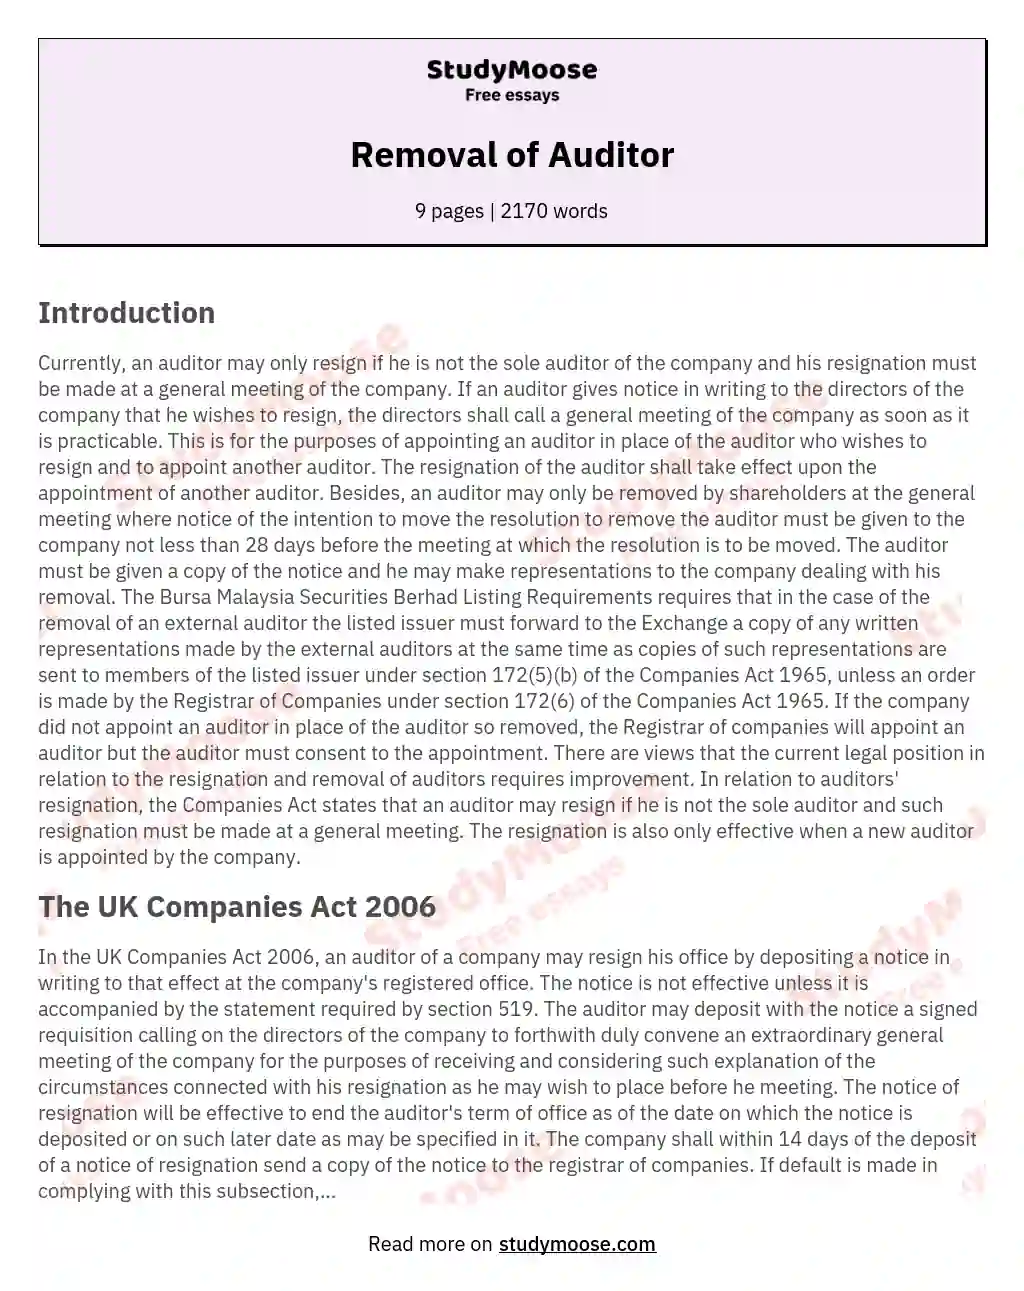 Removal of Auditor essay